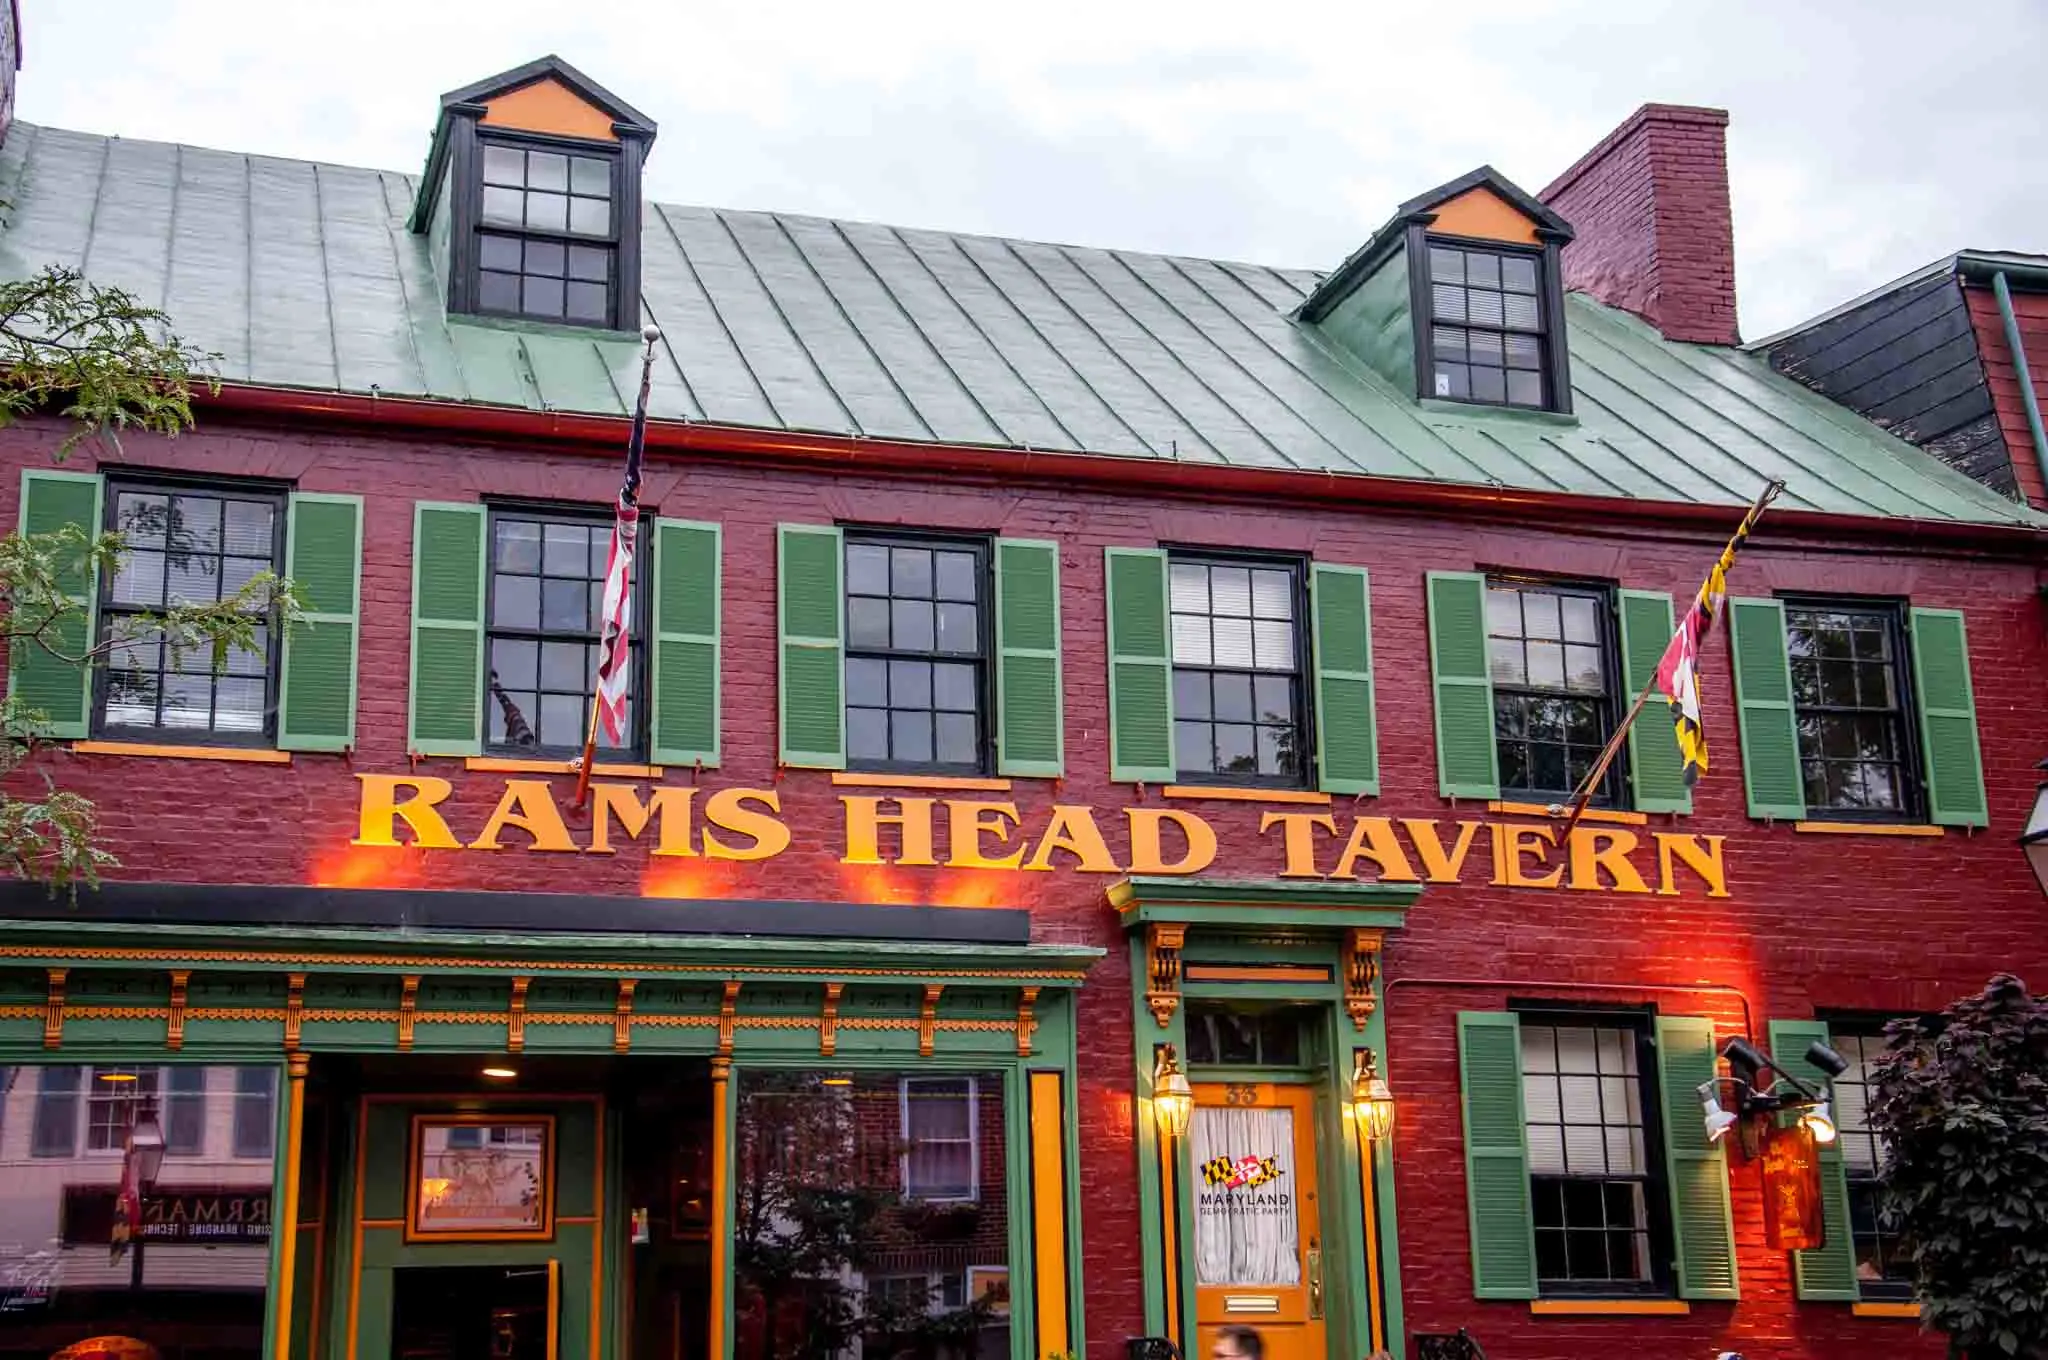 Painted red brick exterior of Rams Head Tavern